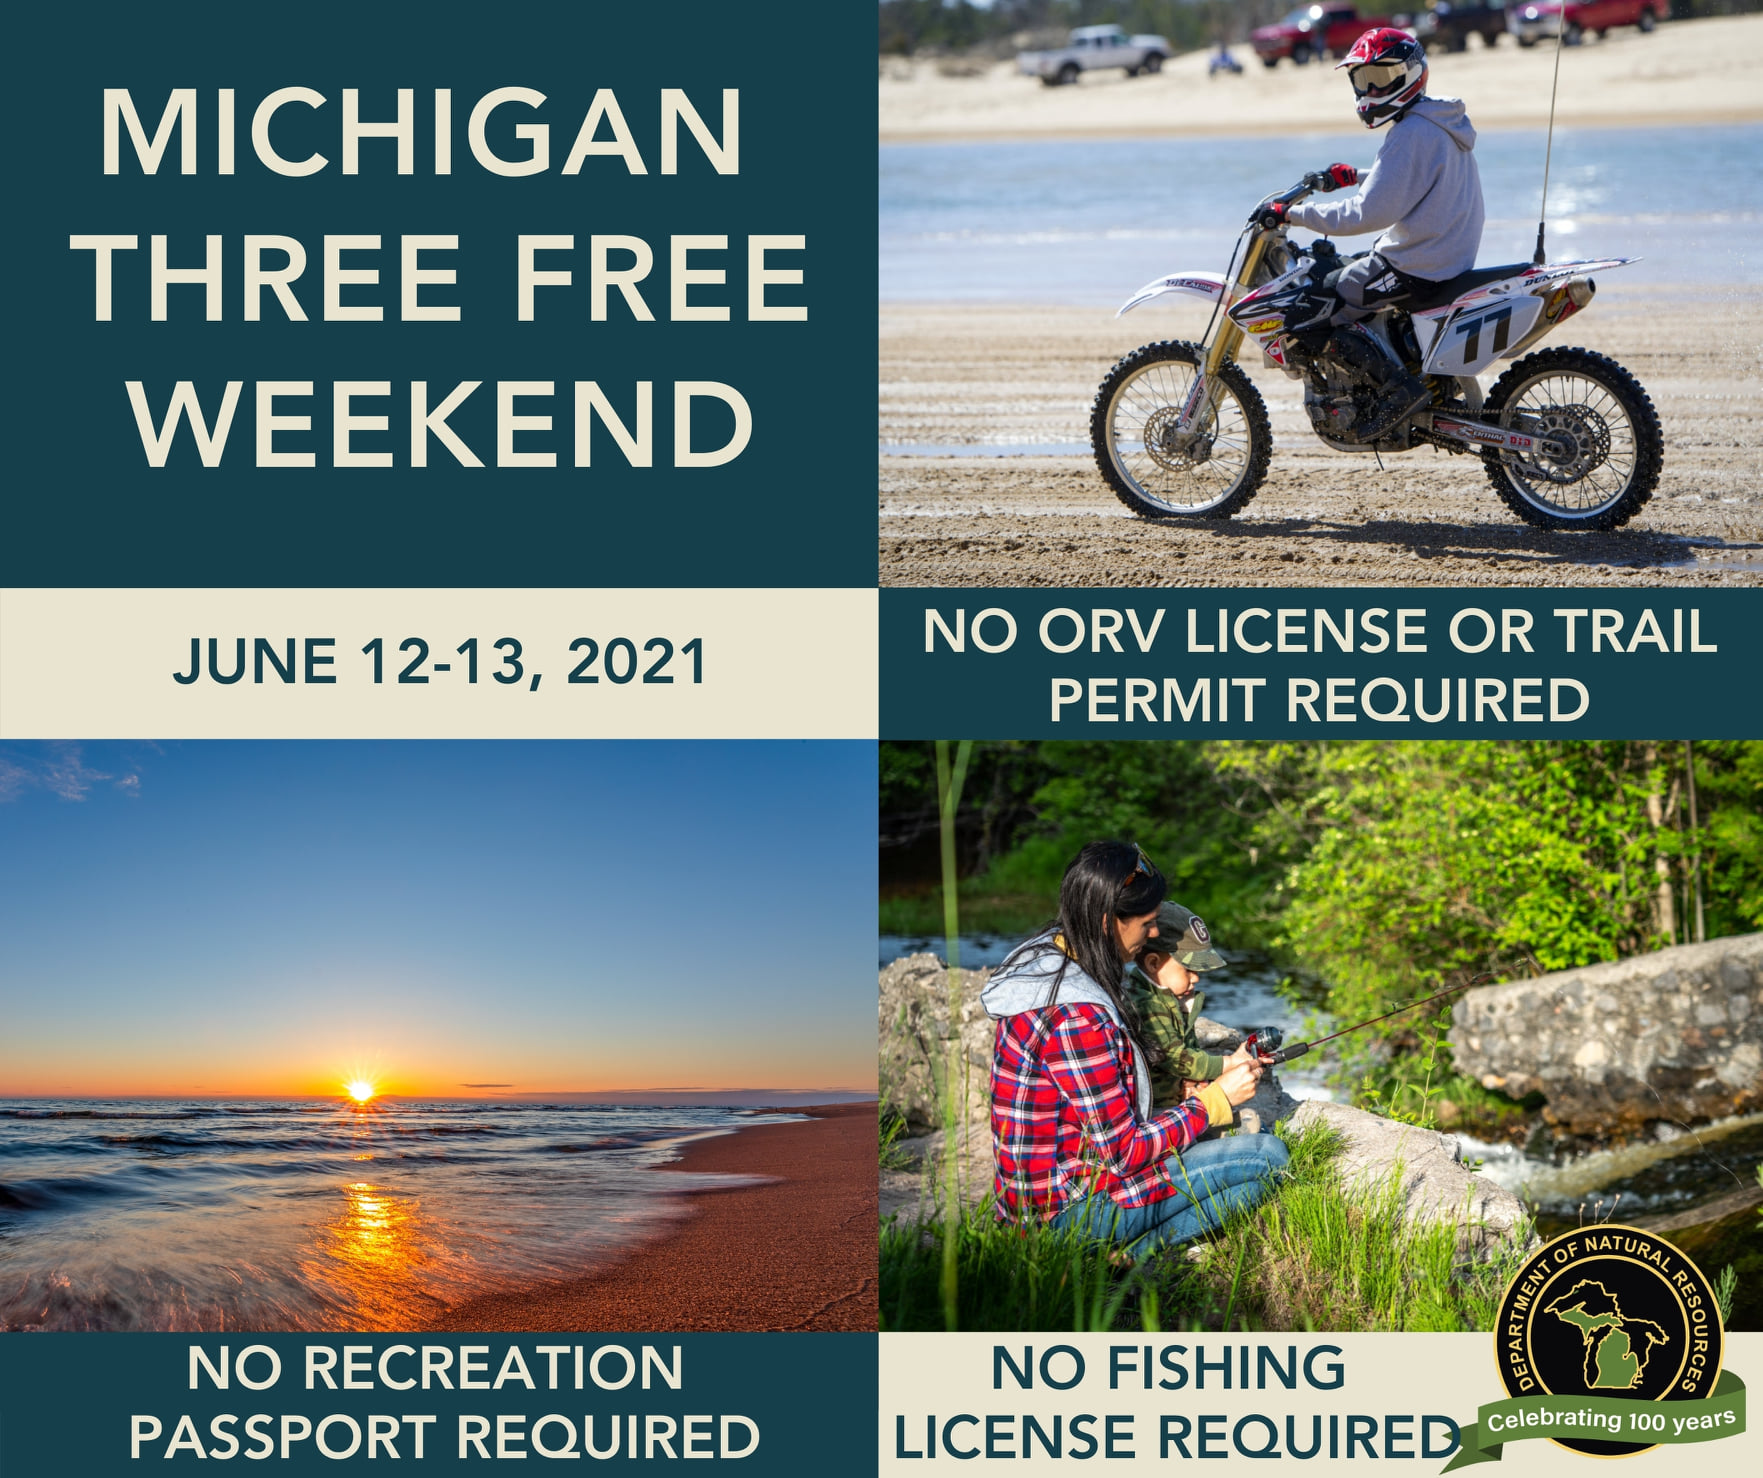 Free fishing, offroading, state park entry June 1213